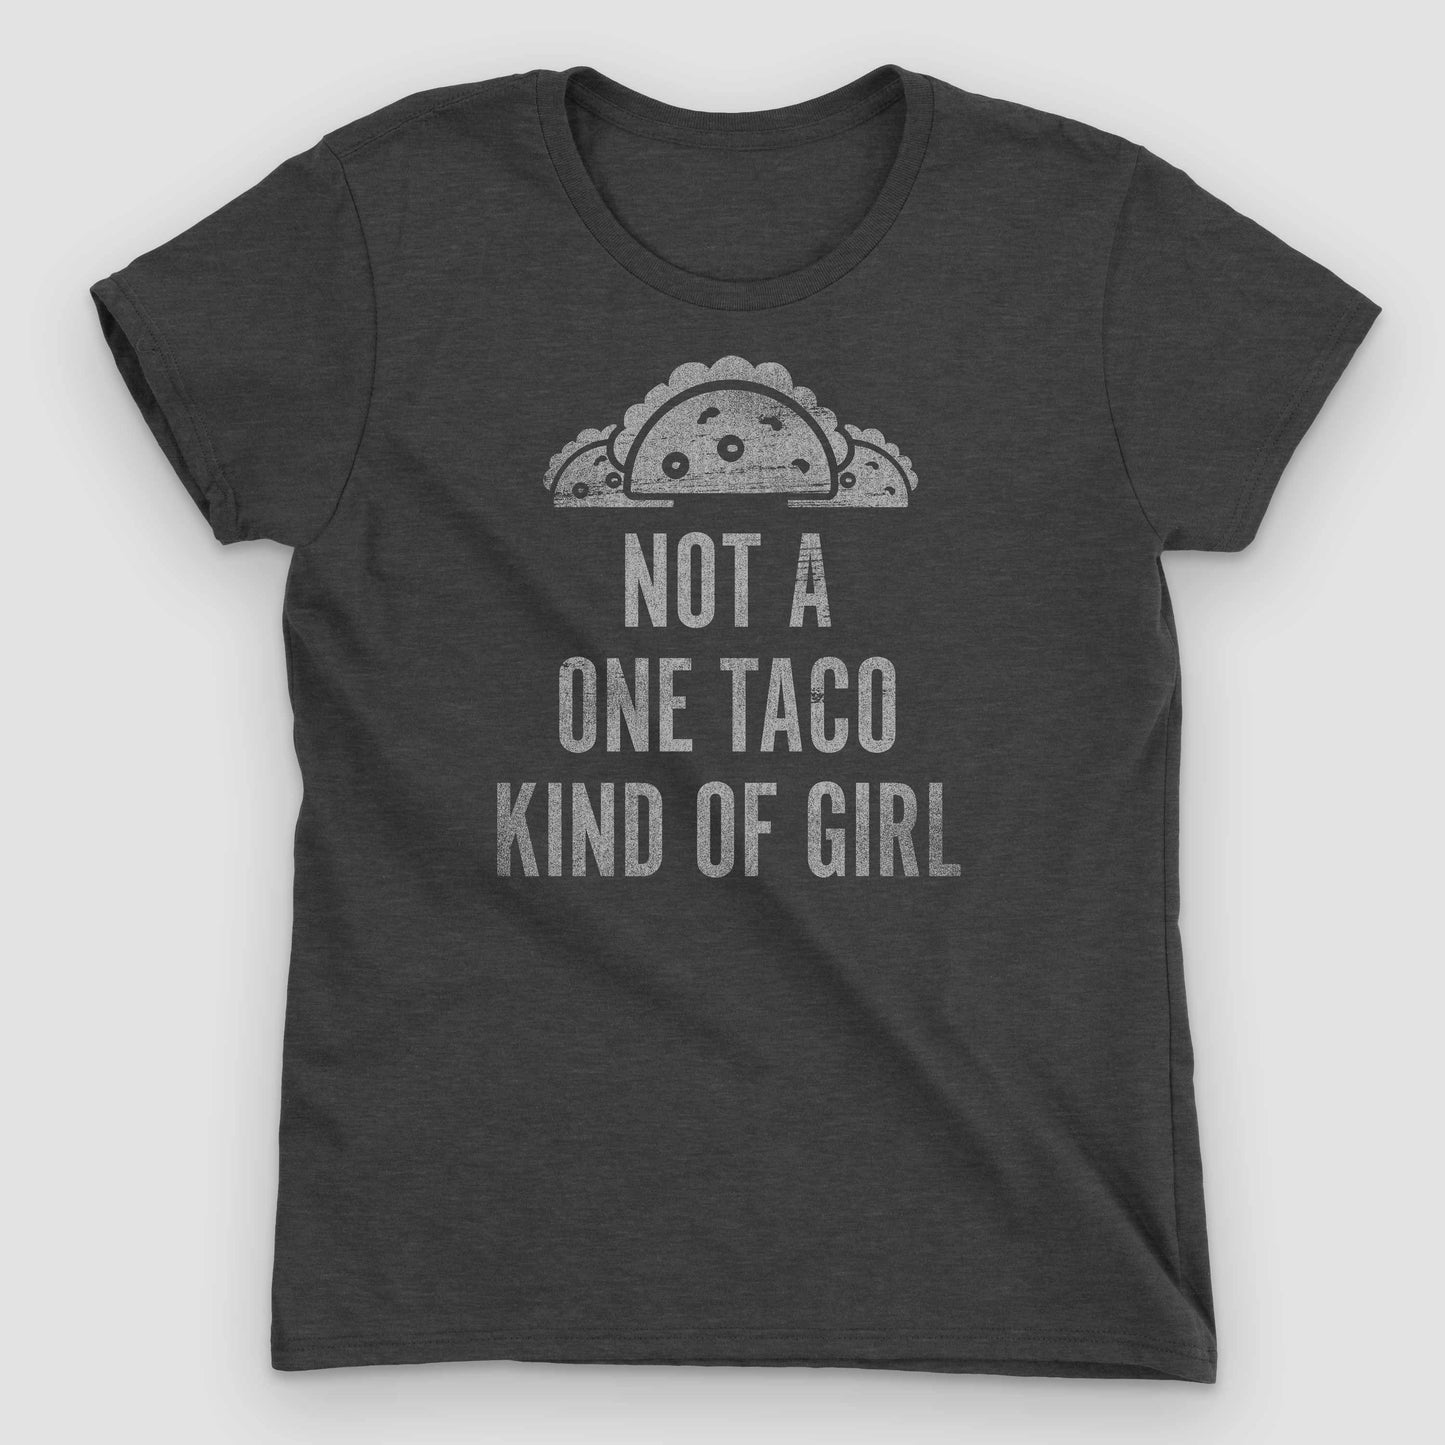 Heather Dark Grey Not a One Taco Kind of Girl Women's Graphic T-Shirt by Snaxtime